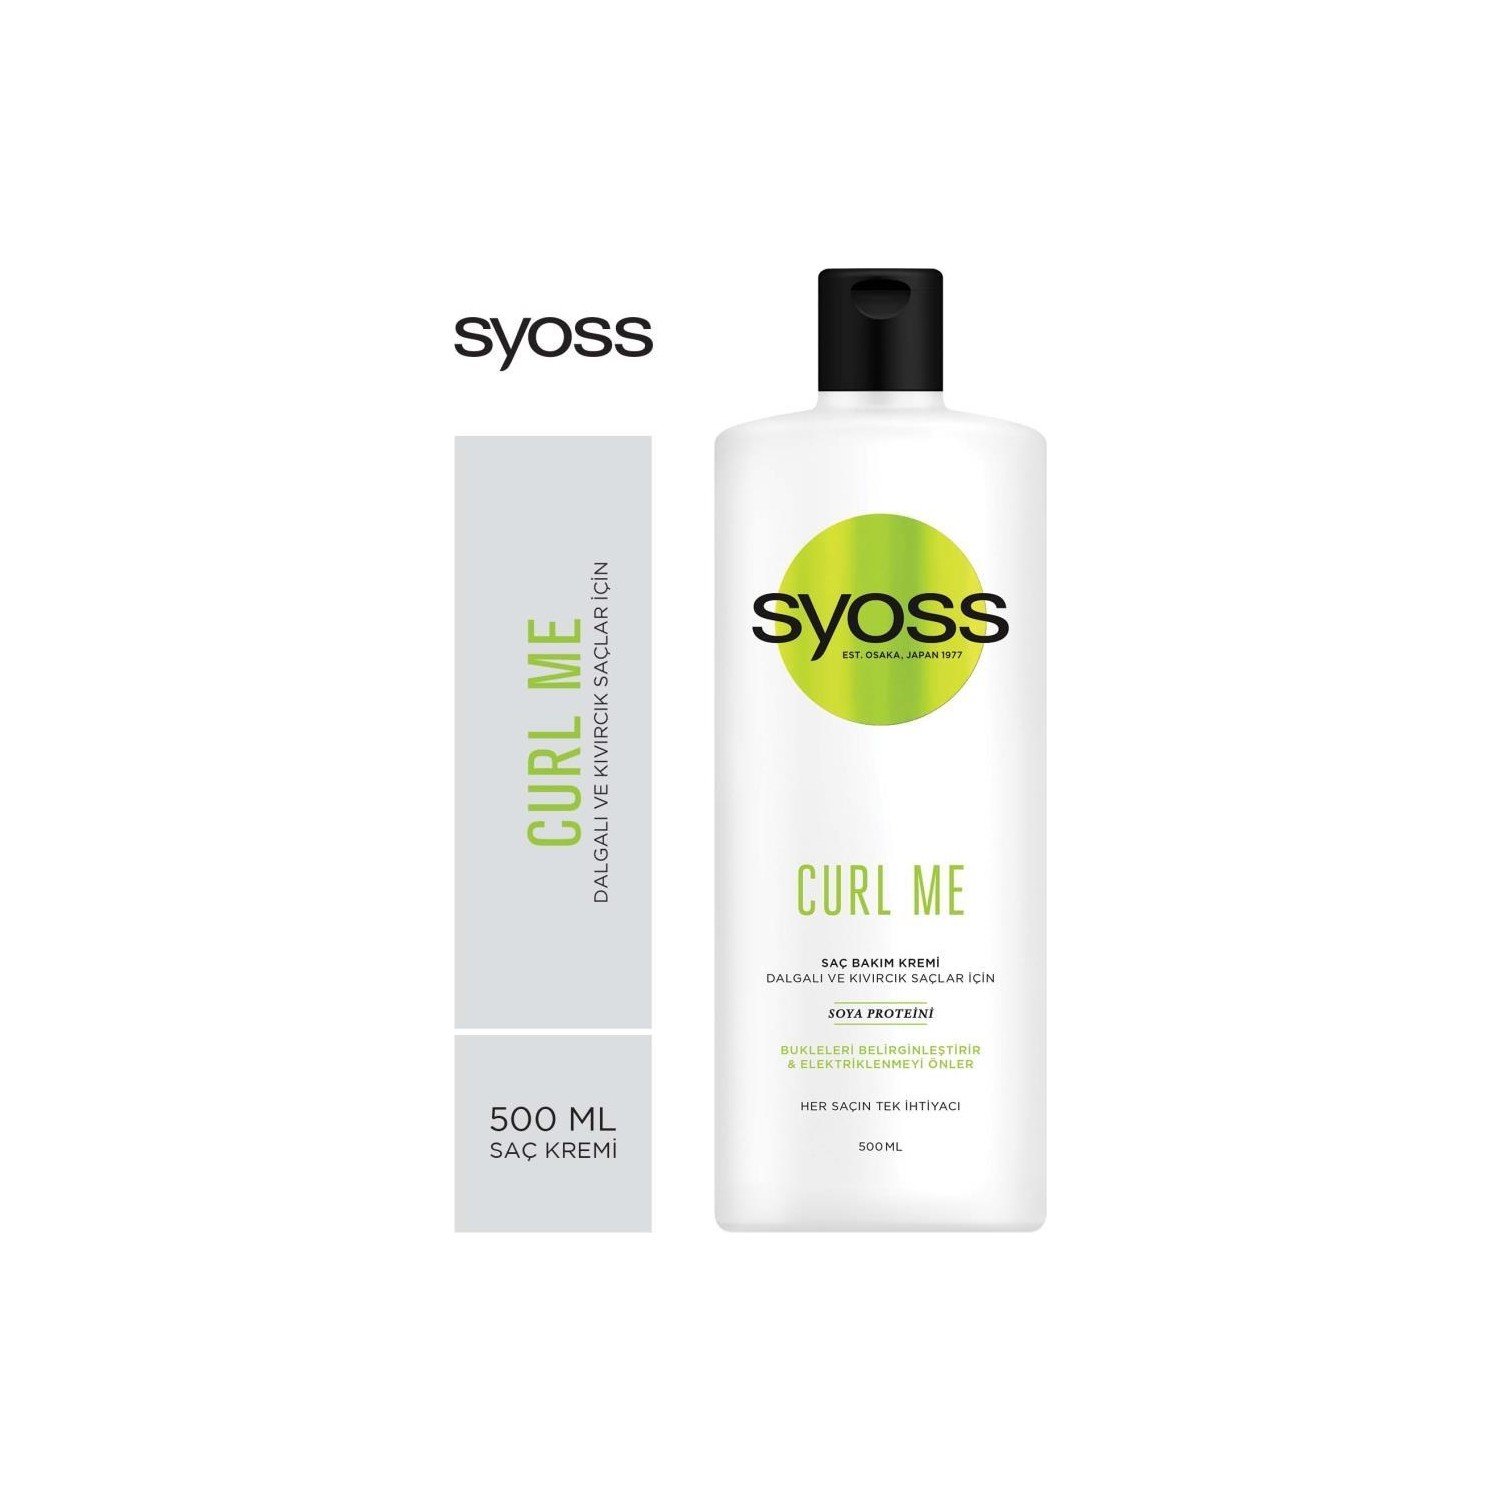 Curl me on. Syoss Curl me. Syoss sampon Curl me 500ml /6. Шампунь Syoss Curl me. Conditioner Wave.